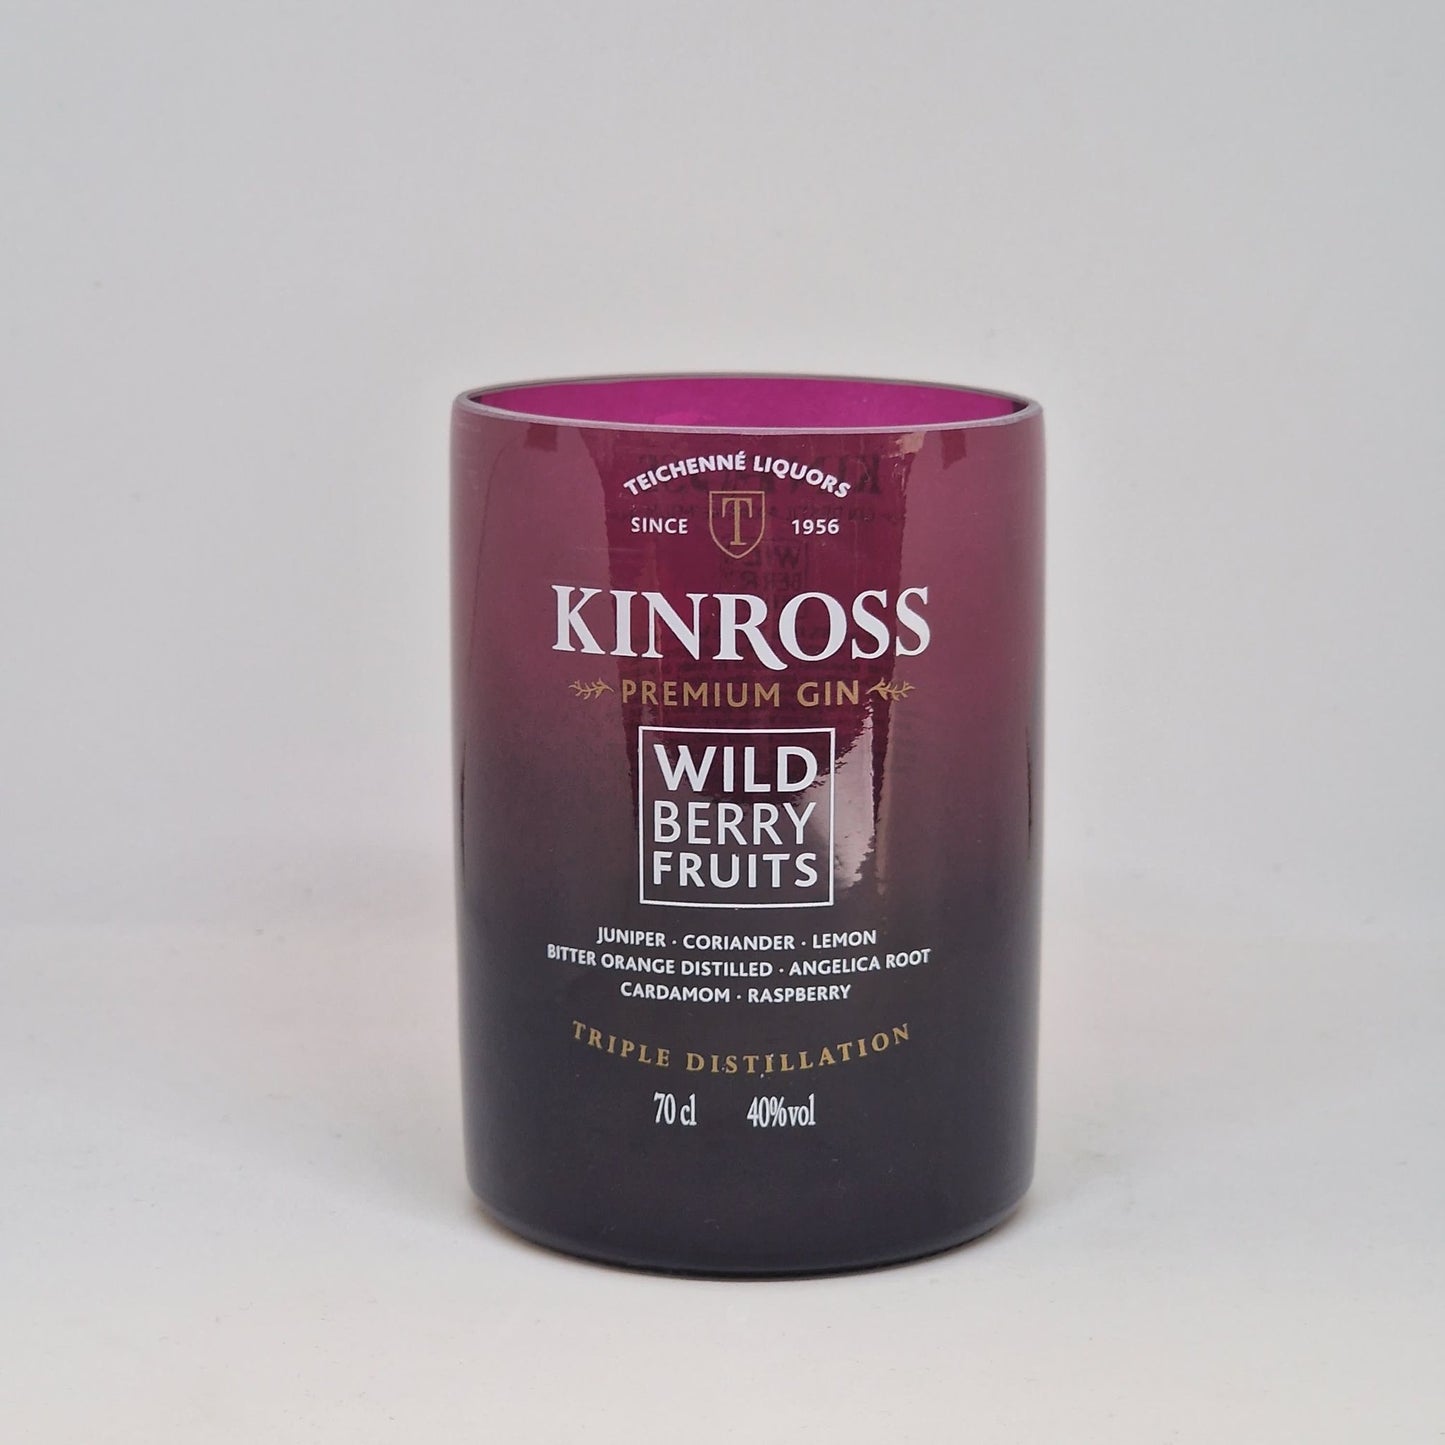 Kinross Wild Berry Fruits Gin Bottle Candle